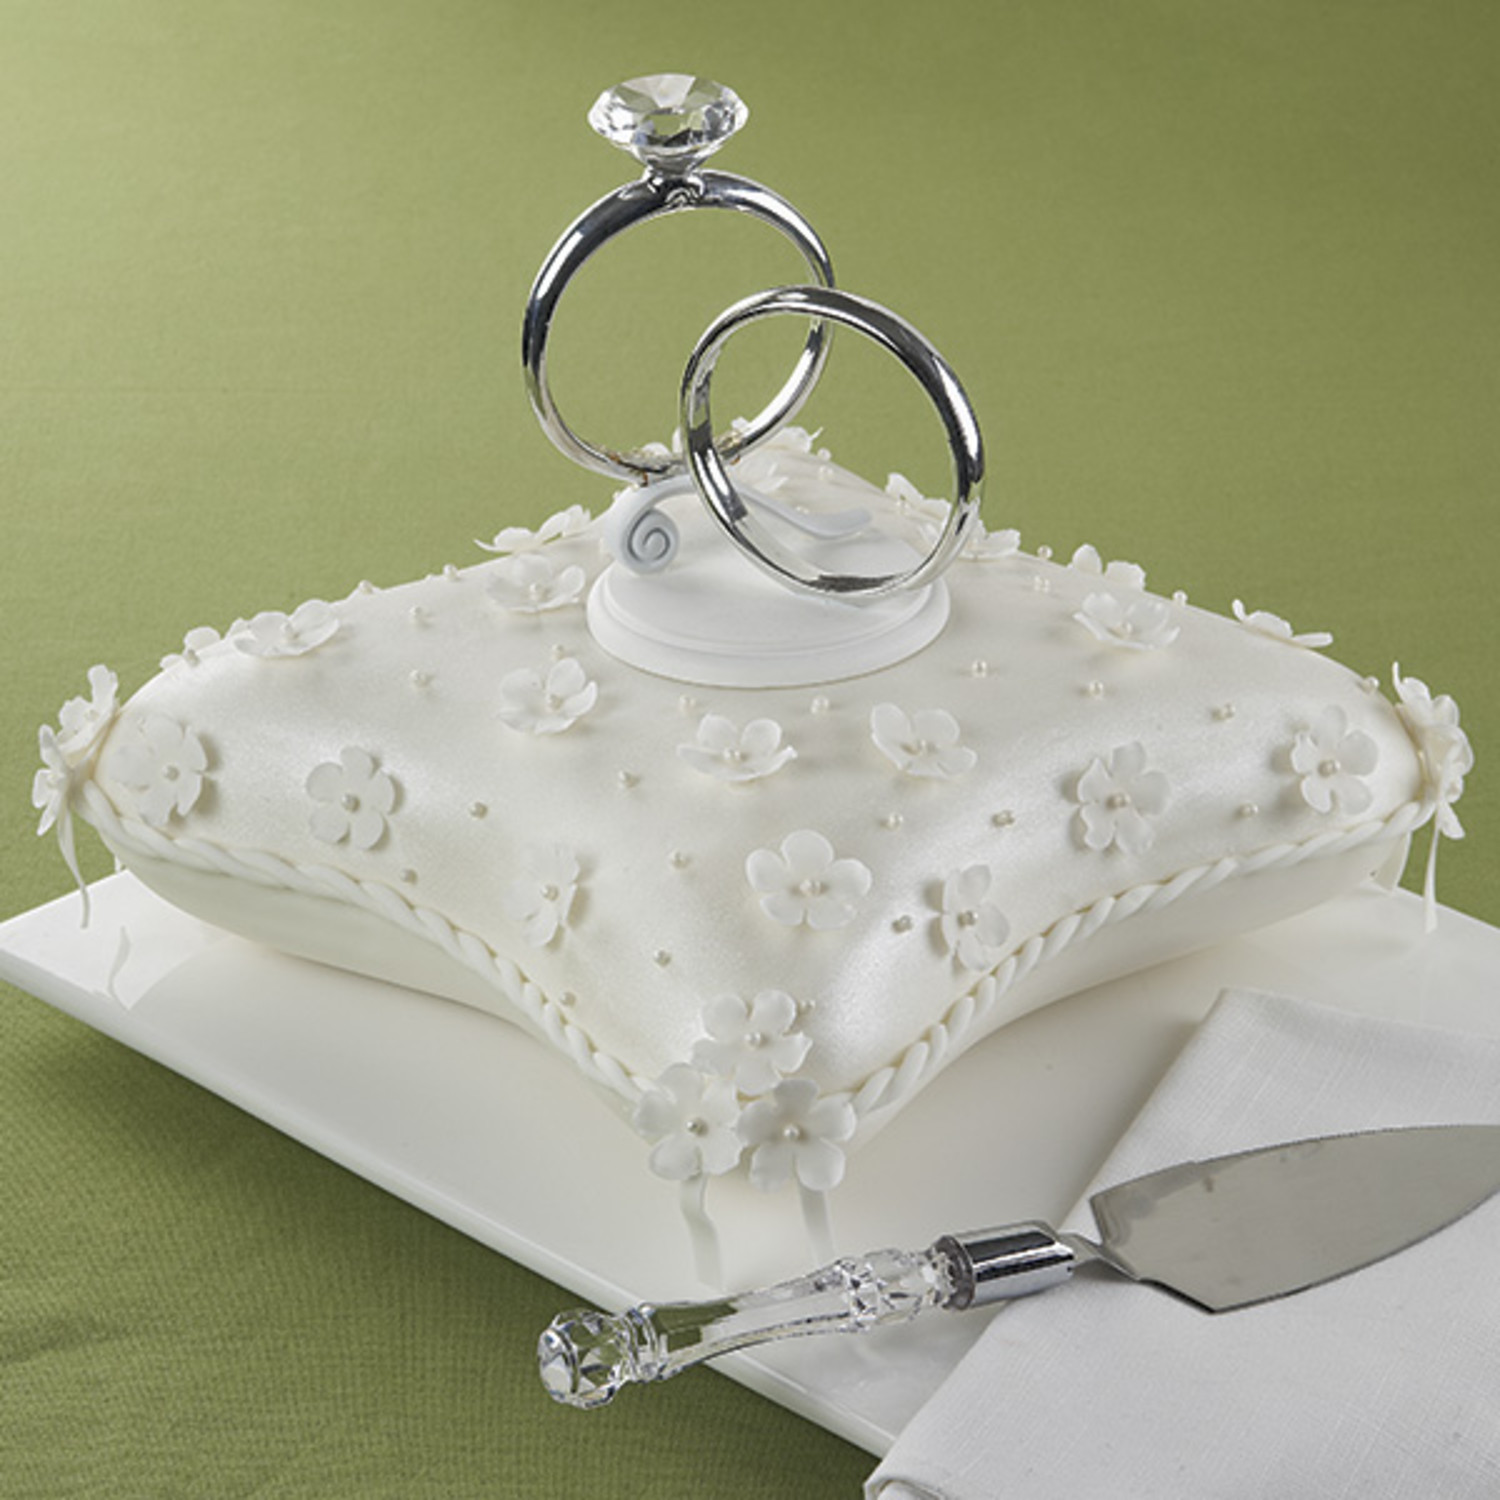 Buy and Send Wedding & Ceremony Cakes Online with Free Shipping |  SurpriseForU